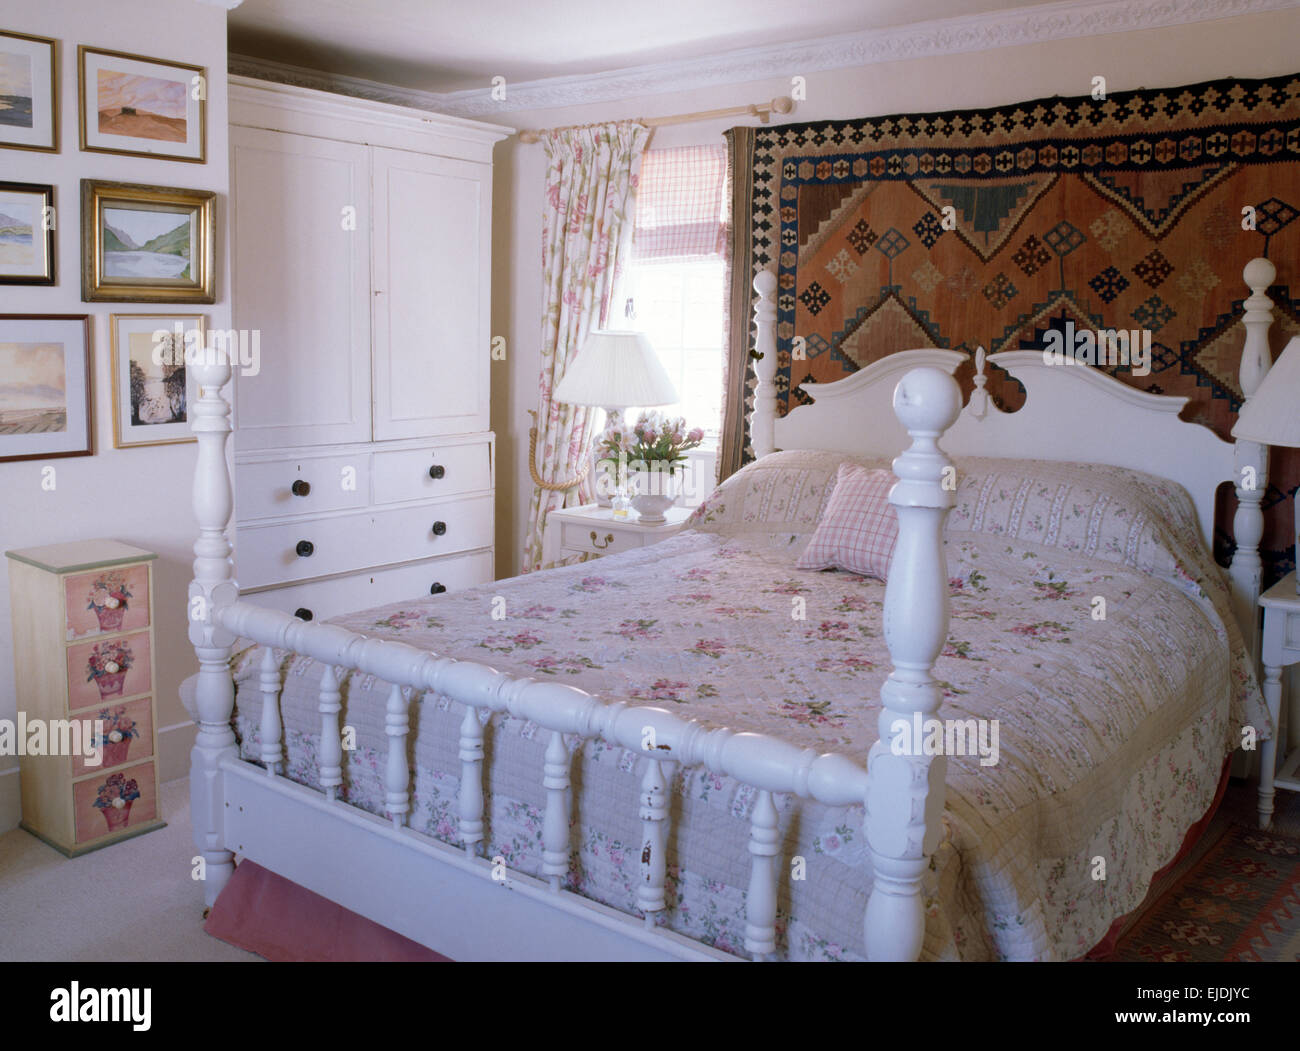 Wooden Wall Behind Bed High Resolution Stock Photography And Images Alamy